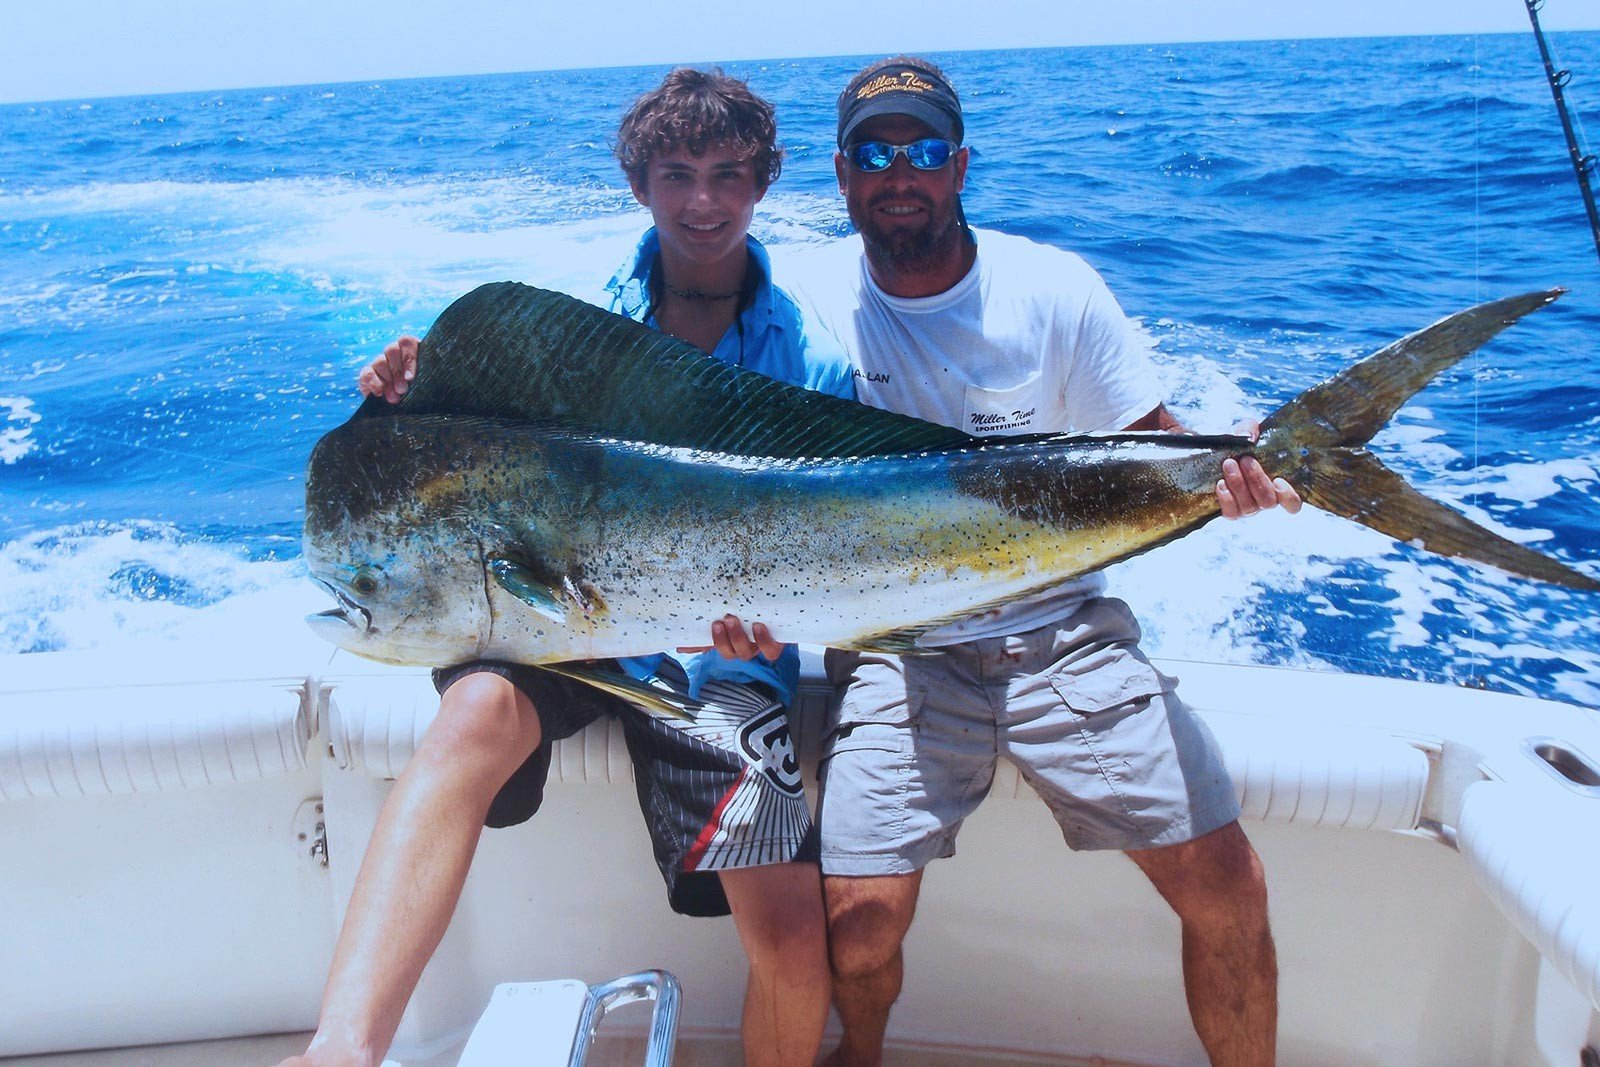 Come for a Sport Fishing day in Samana to remember with your friends!